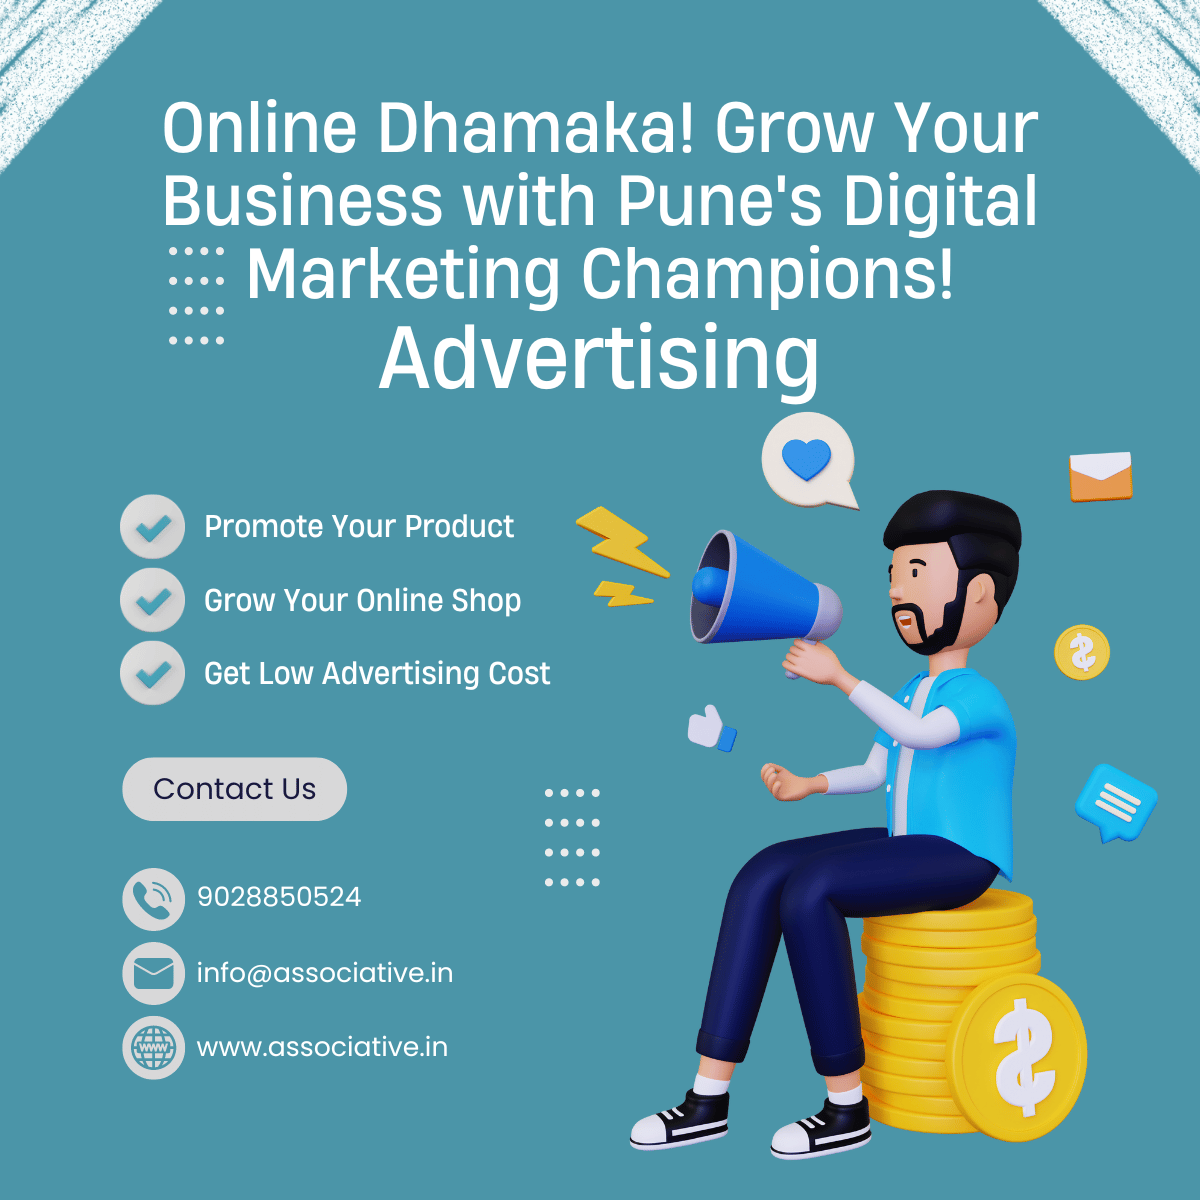 Grow Your Business with Pune's Digital Marketing Champions!